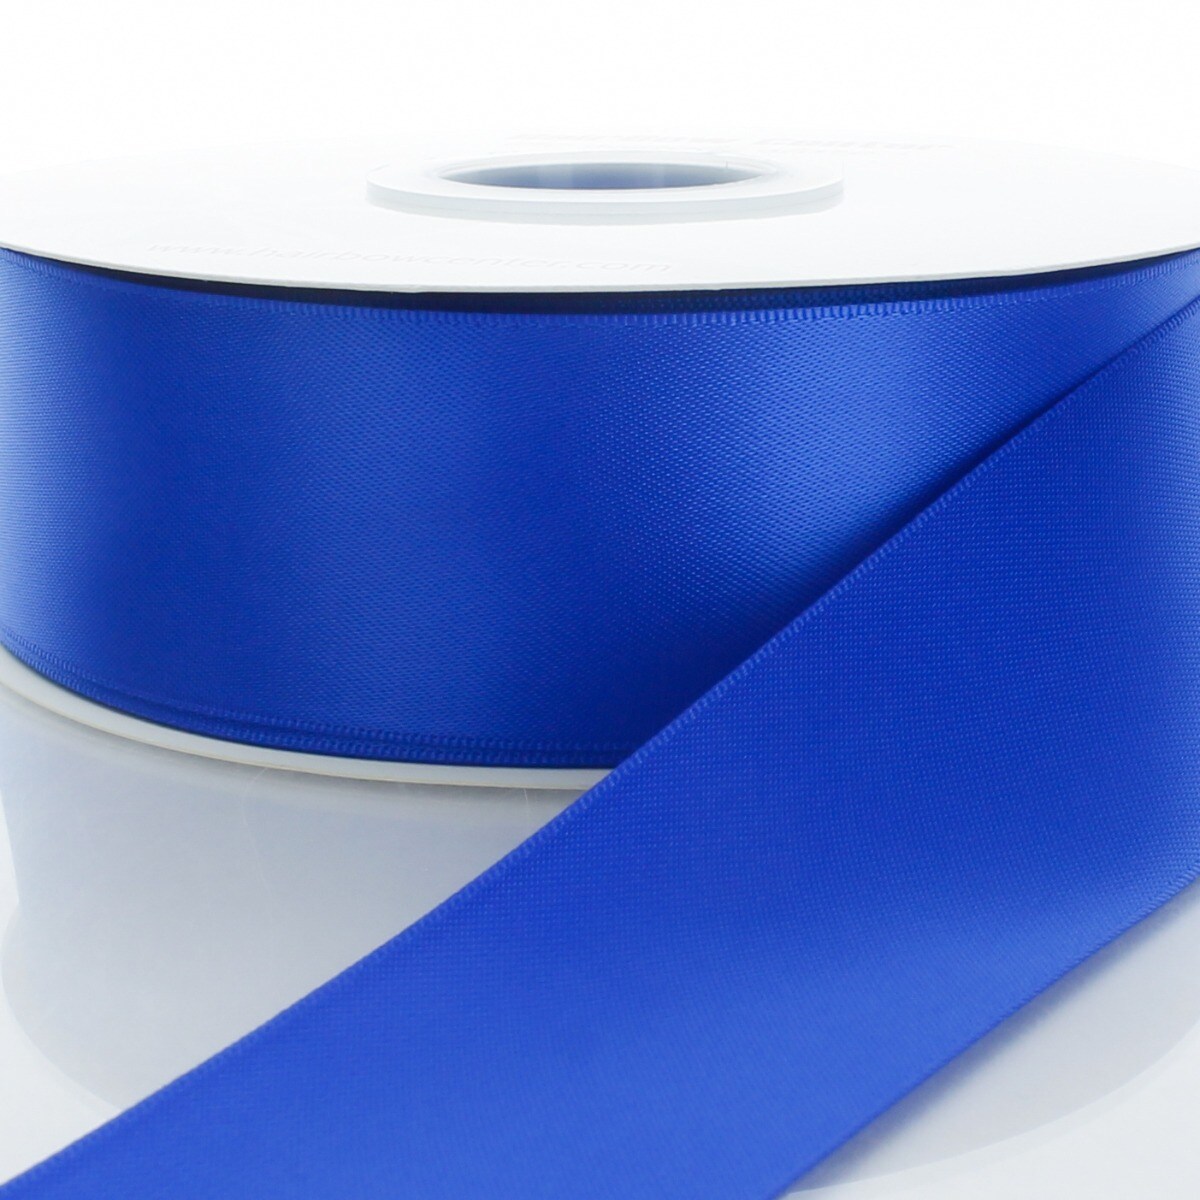 Satin Ribbon - 1/2 inch x 50 Yards, Double Face Solid 1/2 x 50 Yds White